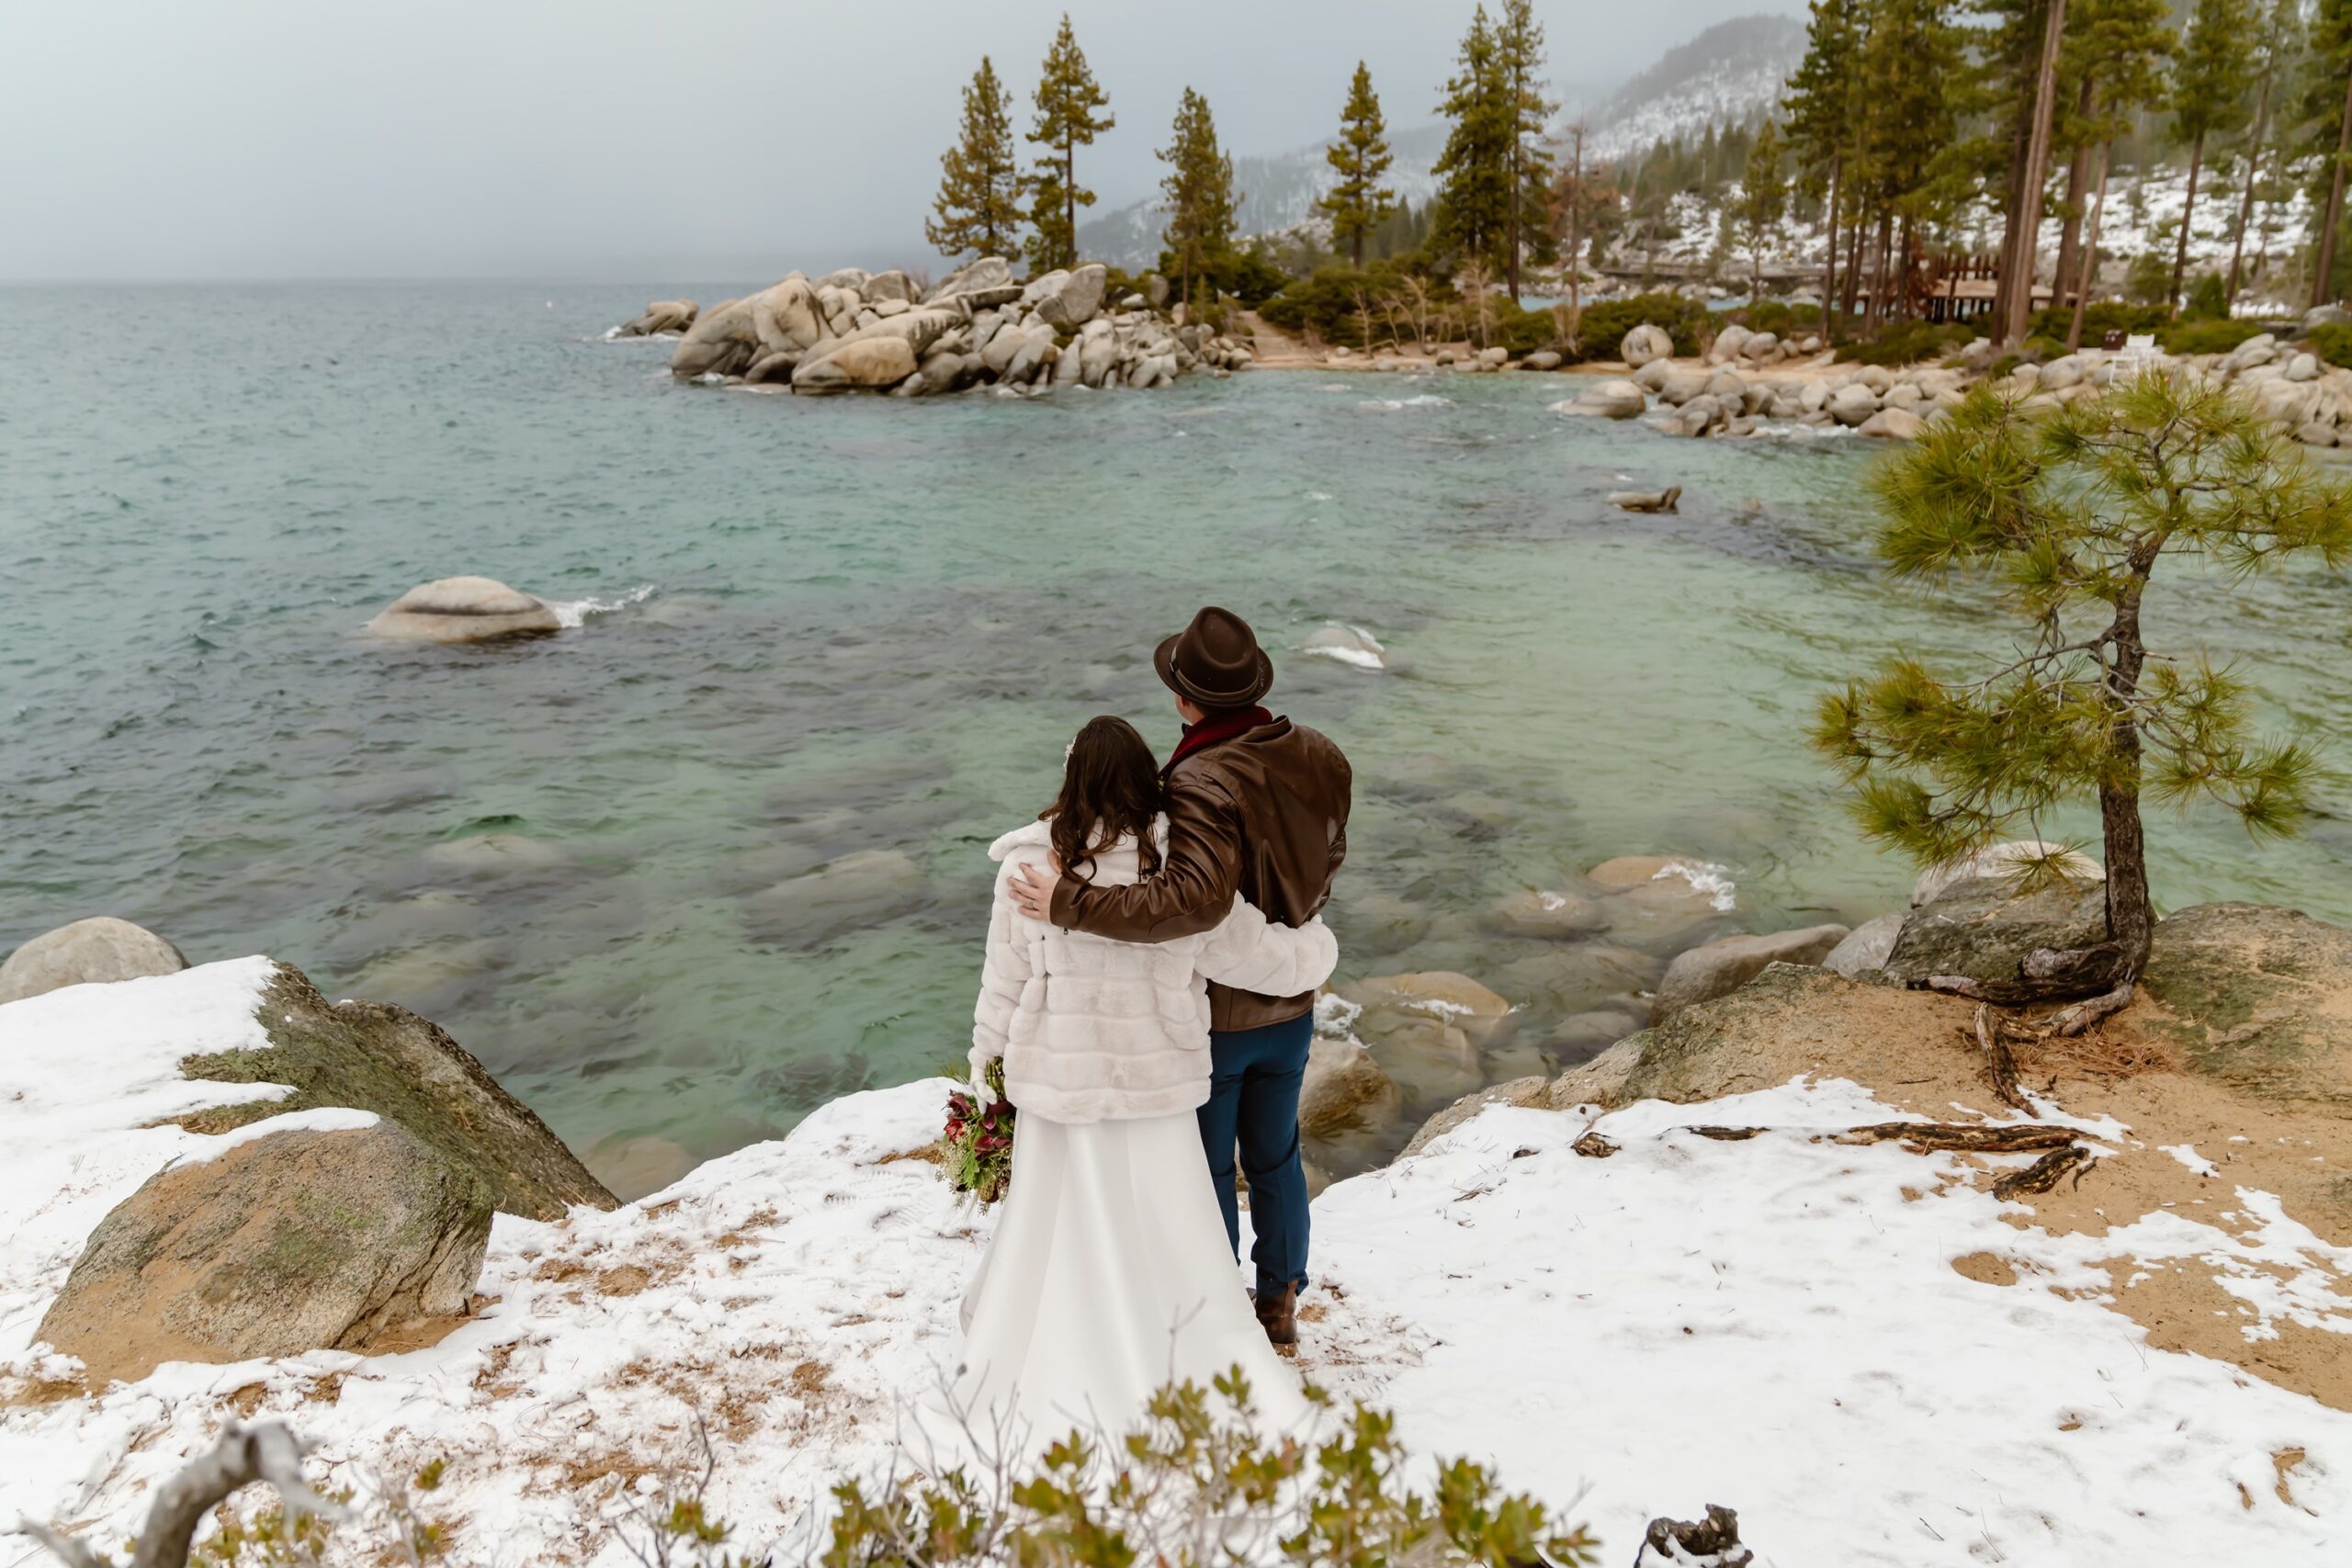 Bride and groom take in views at snowy elopement